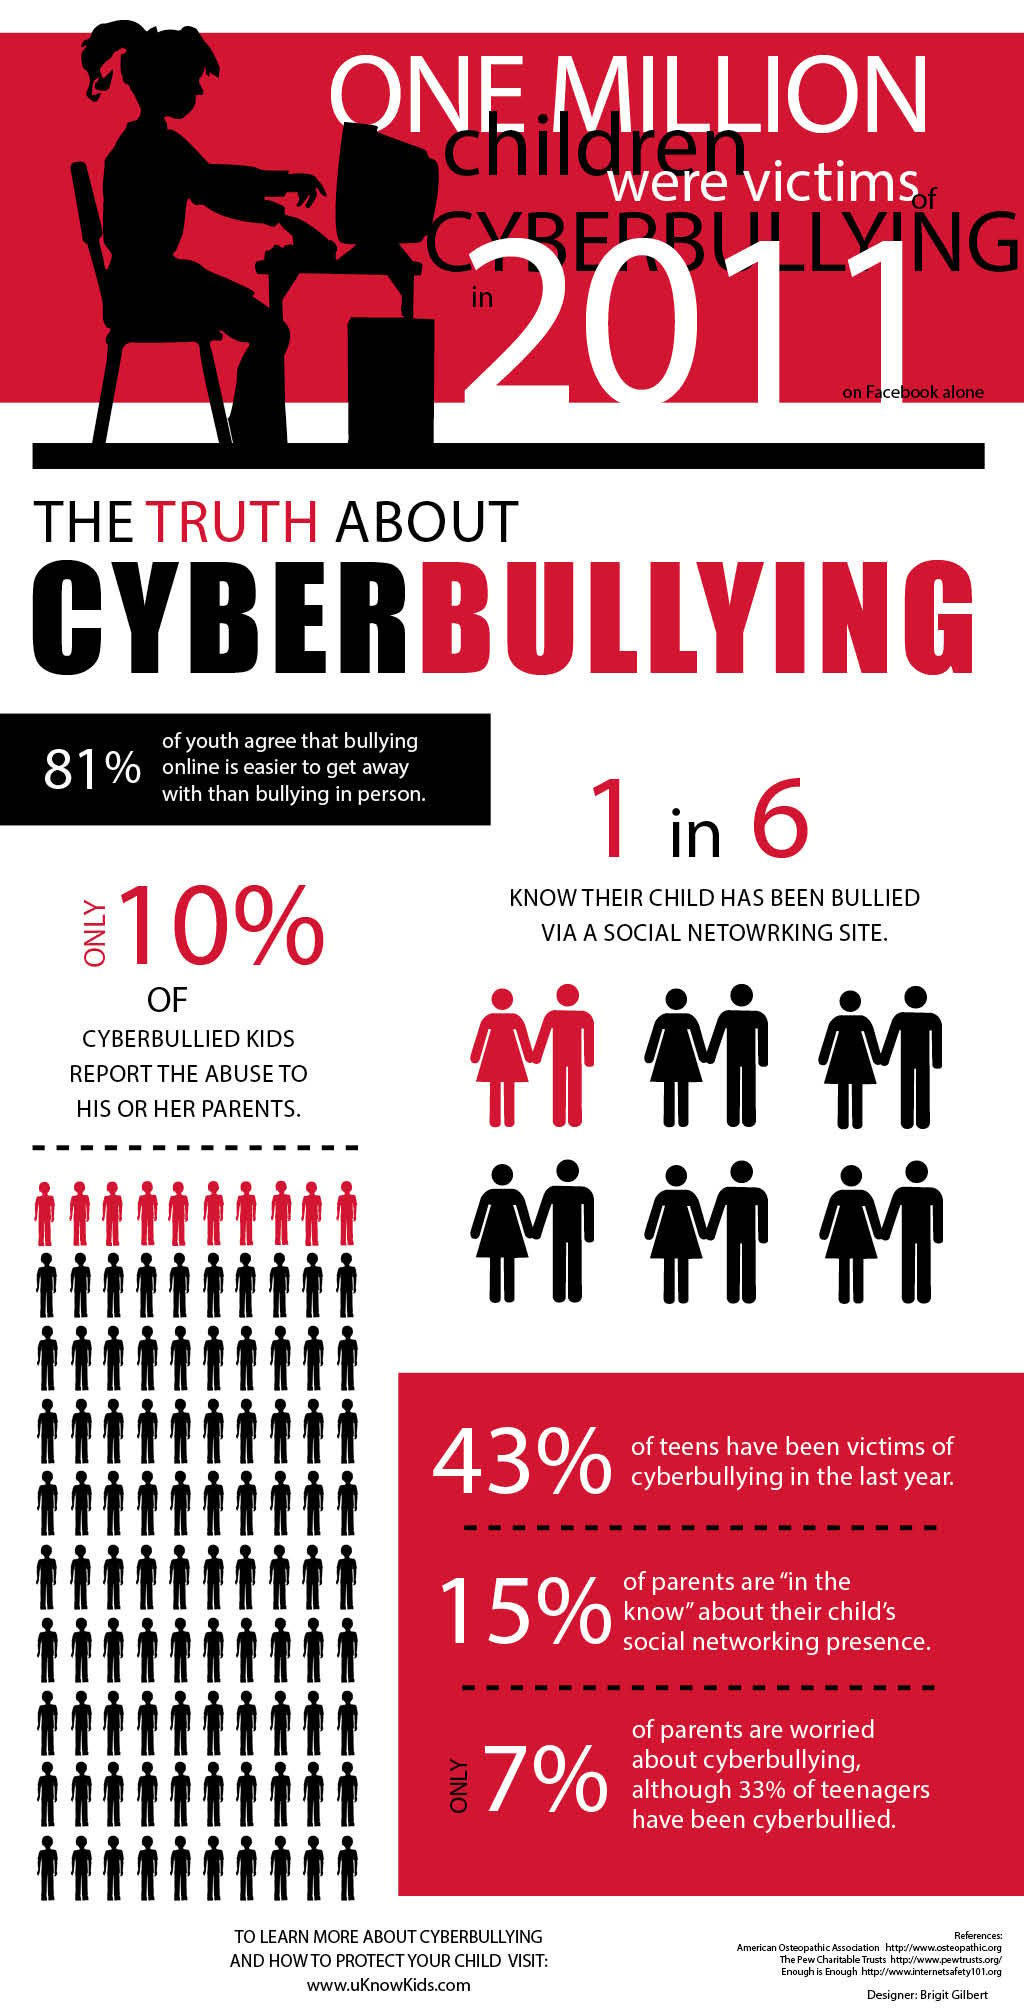 presentation on facebook and risk of cyberbullying victimisation